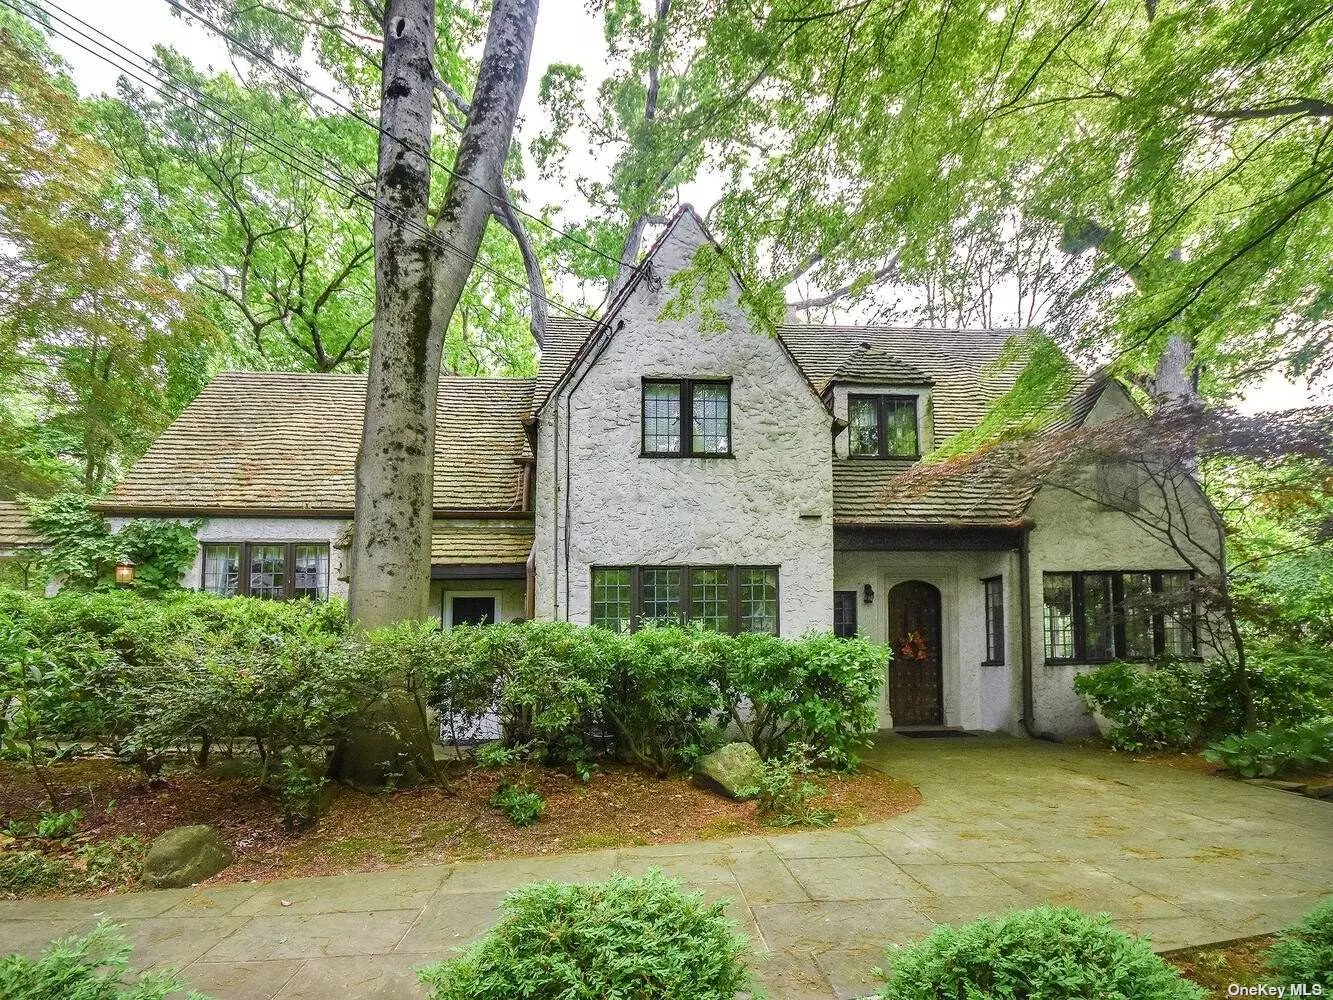 Ever so charming 4 BR Traditional English Tudor nestled on lush private 1/2 acre steps to beach & schools. This home boasts a large Eat-in-Kitchen, sunlit Formal Dining Room, Living Room with fireplace, 1st floor Bedroom suite, summer screened in porch. The 2nd floor consists of a large Principal Suite plus 2 additional Bedrooms, 2 car garage, courtyard. North Shore Schools, beach privileges